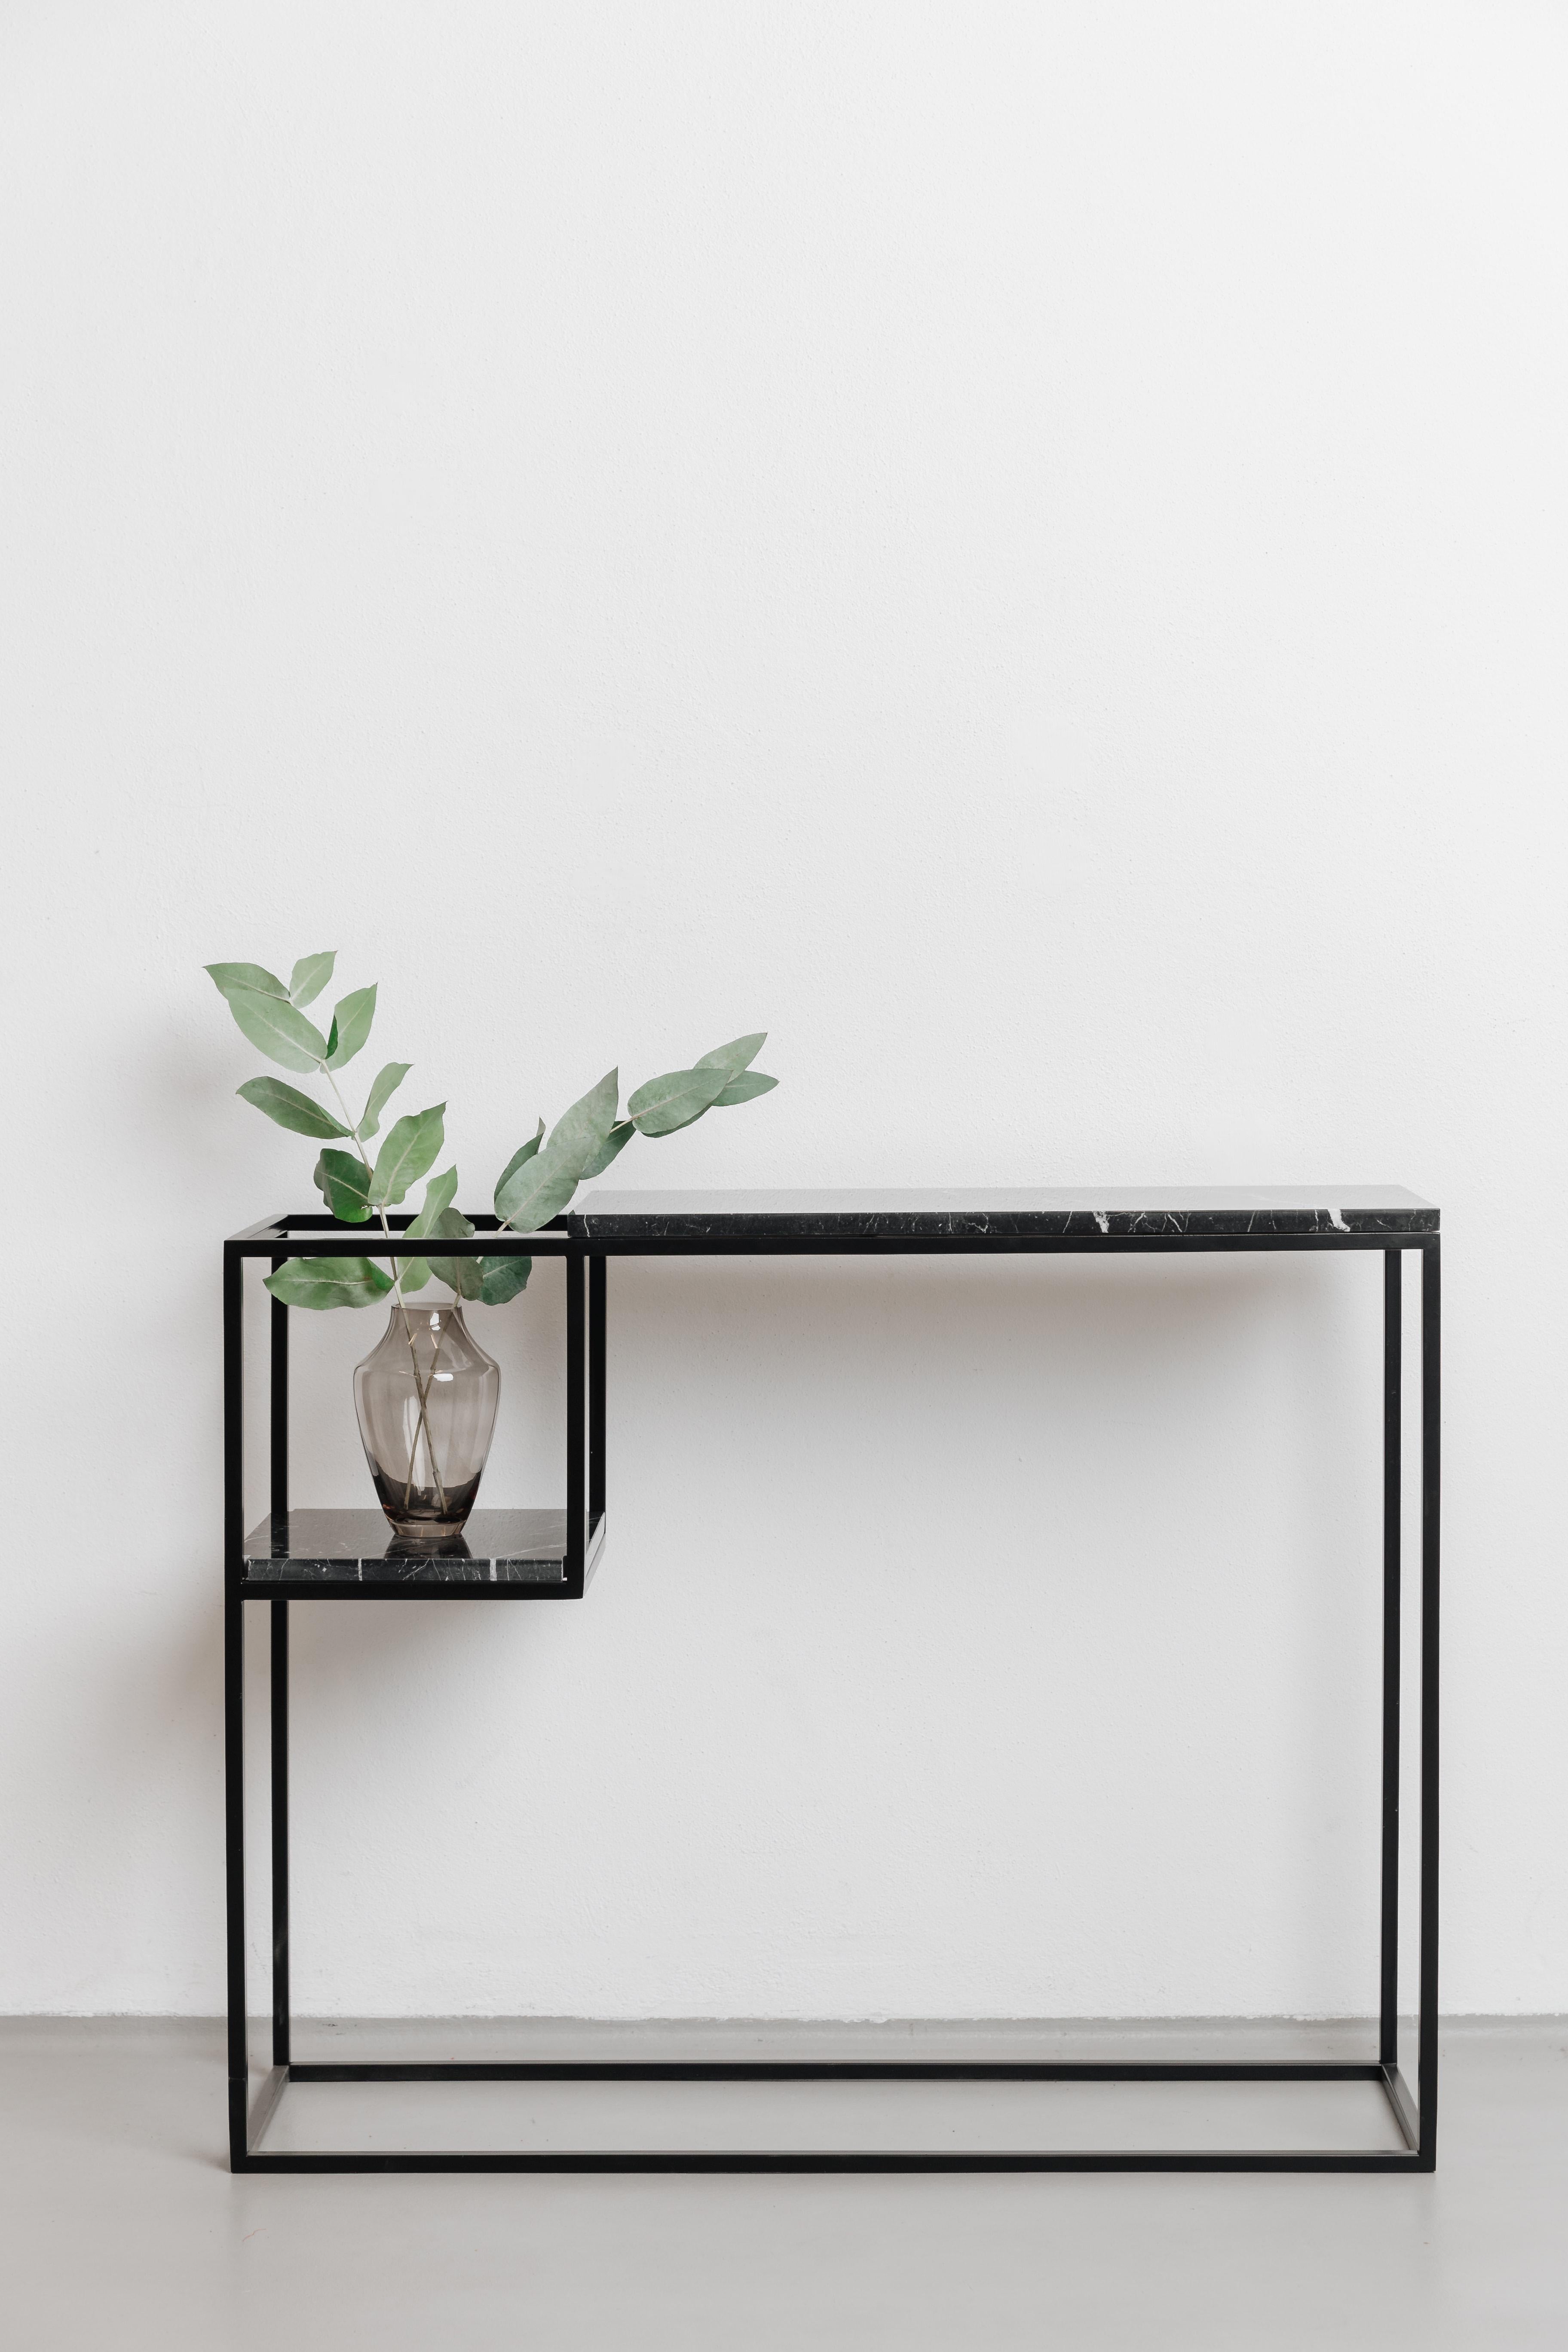 The HOP MAXI console has a marble top on a steel black frame. It will look great in your hall, living room or bedroom. The lowered shelf is the perfect place for flowers or books, as an unconventional way of arranging your space. The beautiful